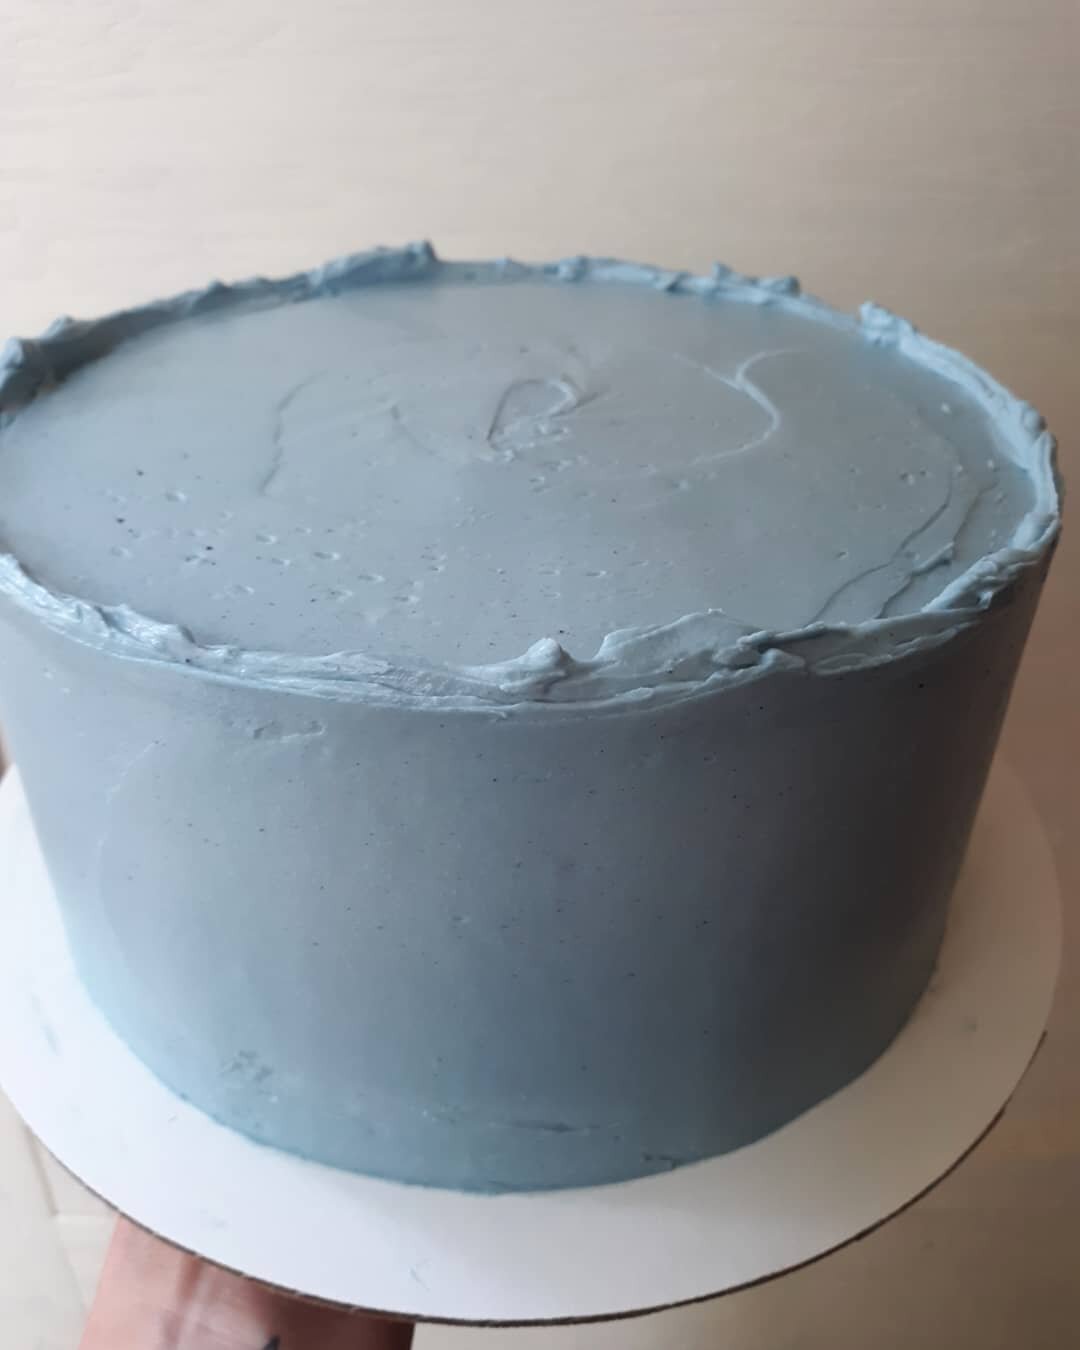 Can you believe this blue is all natural? This vanilla swiss meringue buttercream is dyed with butterfly pea flower powder.

Natural blue baby shower cake: Champagne cake, lemon curd, vanilla swiss meringue buttercream